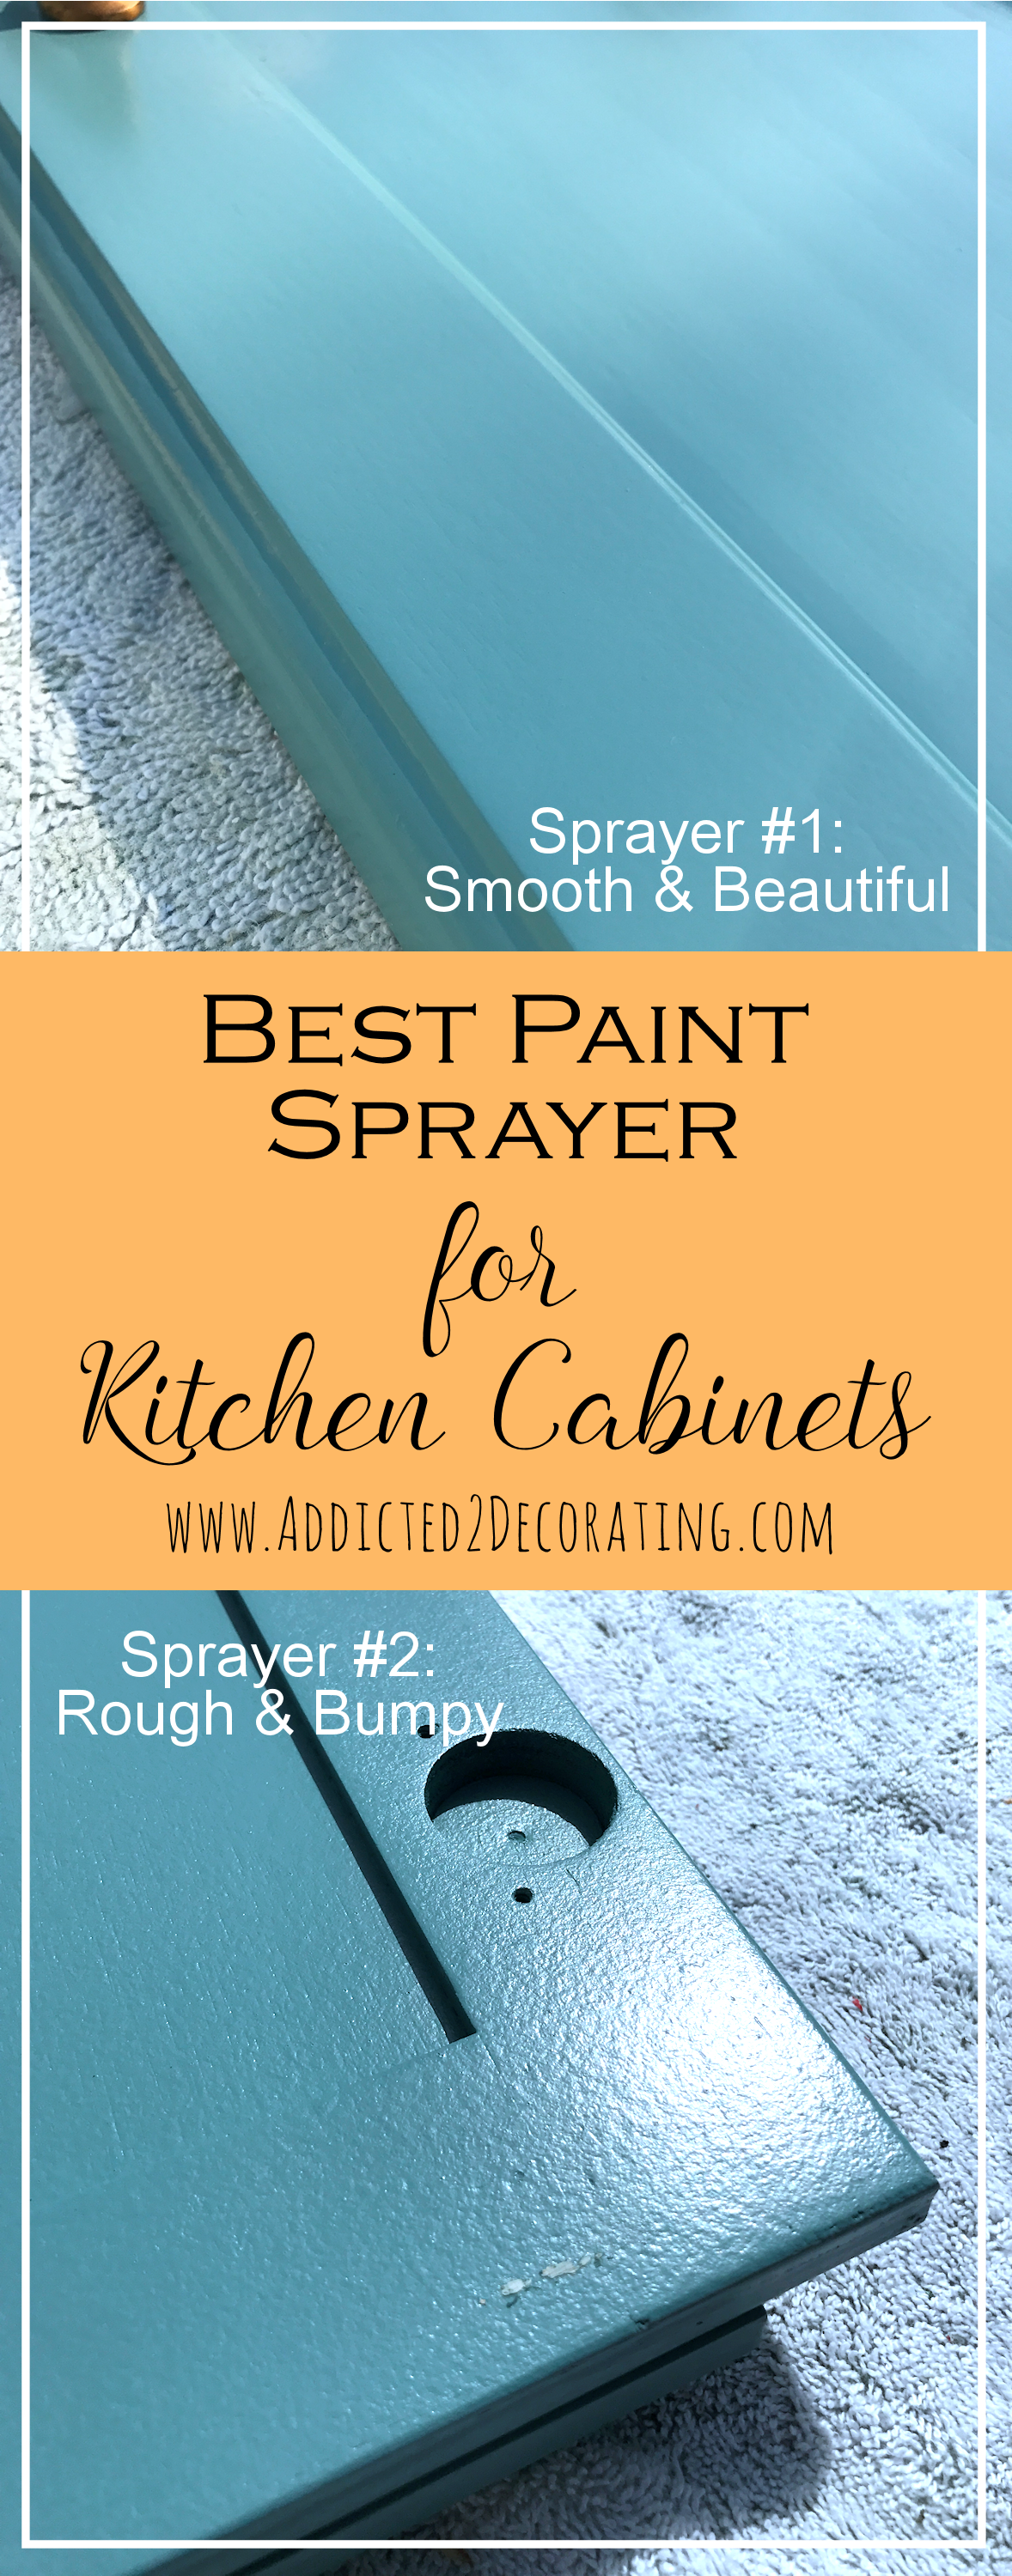 The Best Paint Sprayer For Kitchen Cabinets (Plus Tips On Getting A Beautiful Finish)